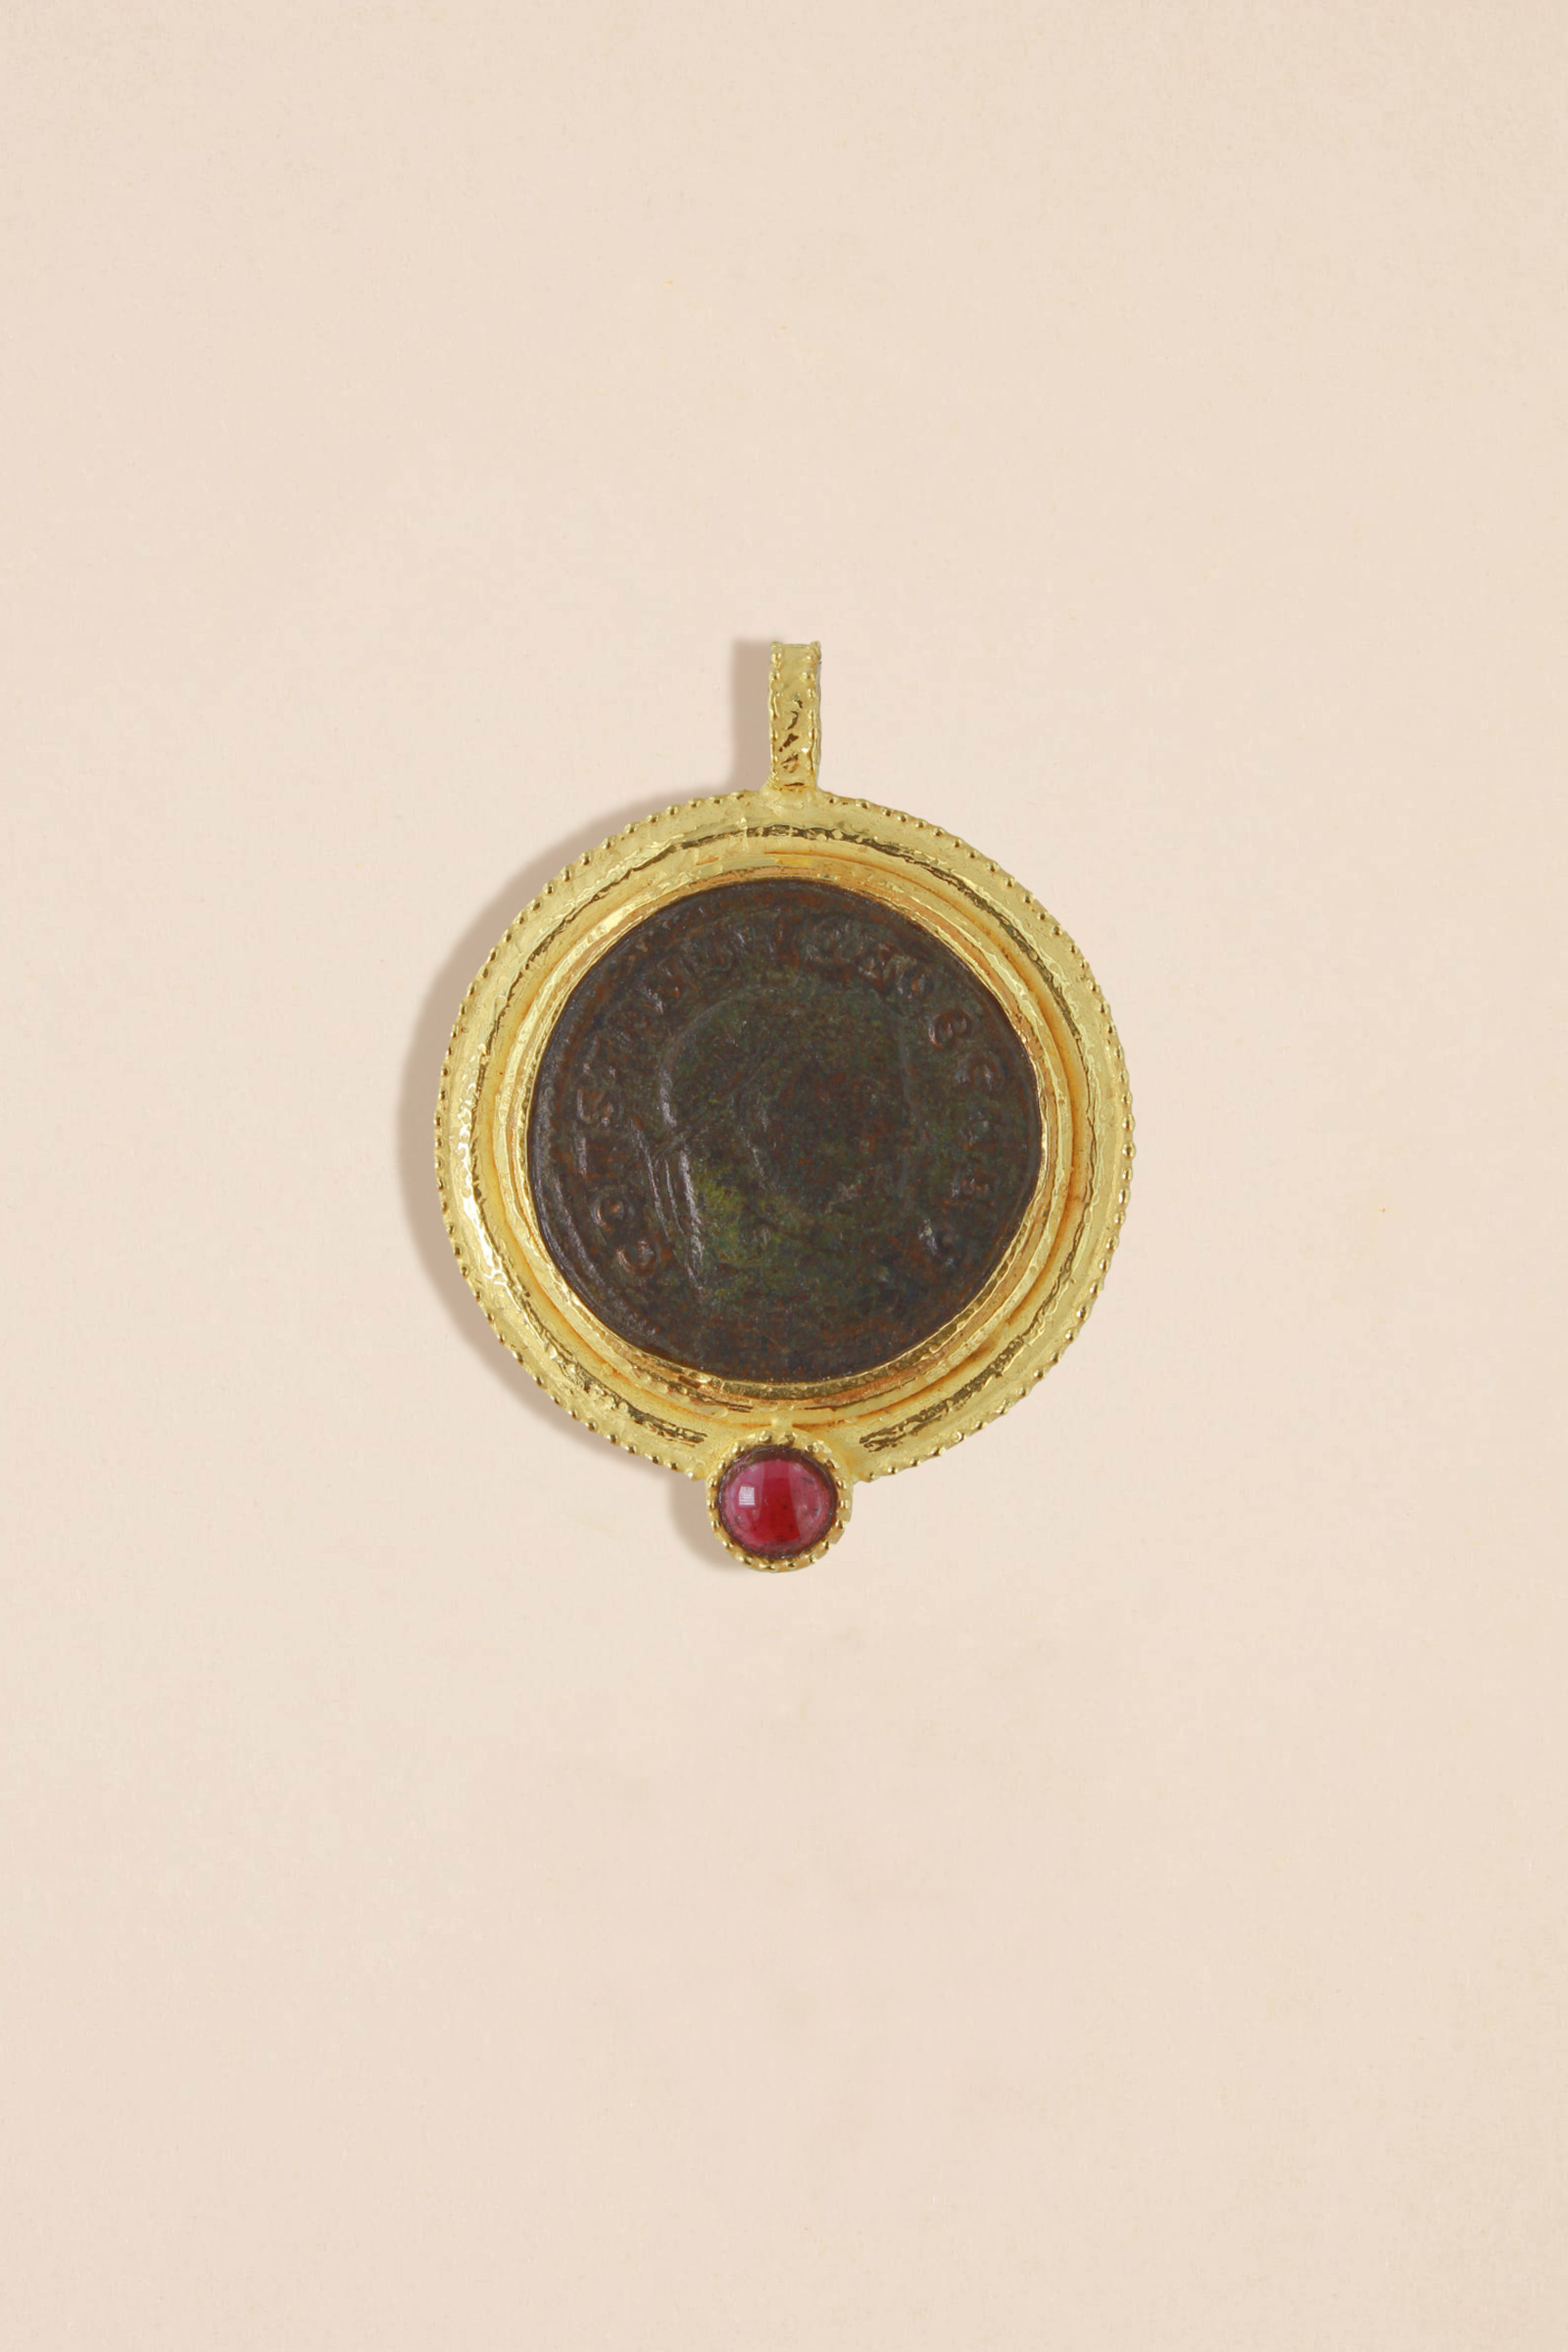 SH613A-18-Kt-Yellow-Gold-Pendant-with-Roman-Coin-and-Granet-Cabochon-1